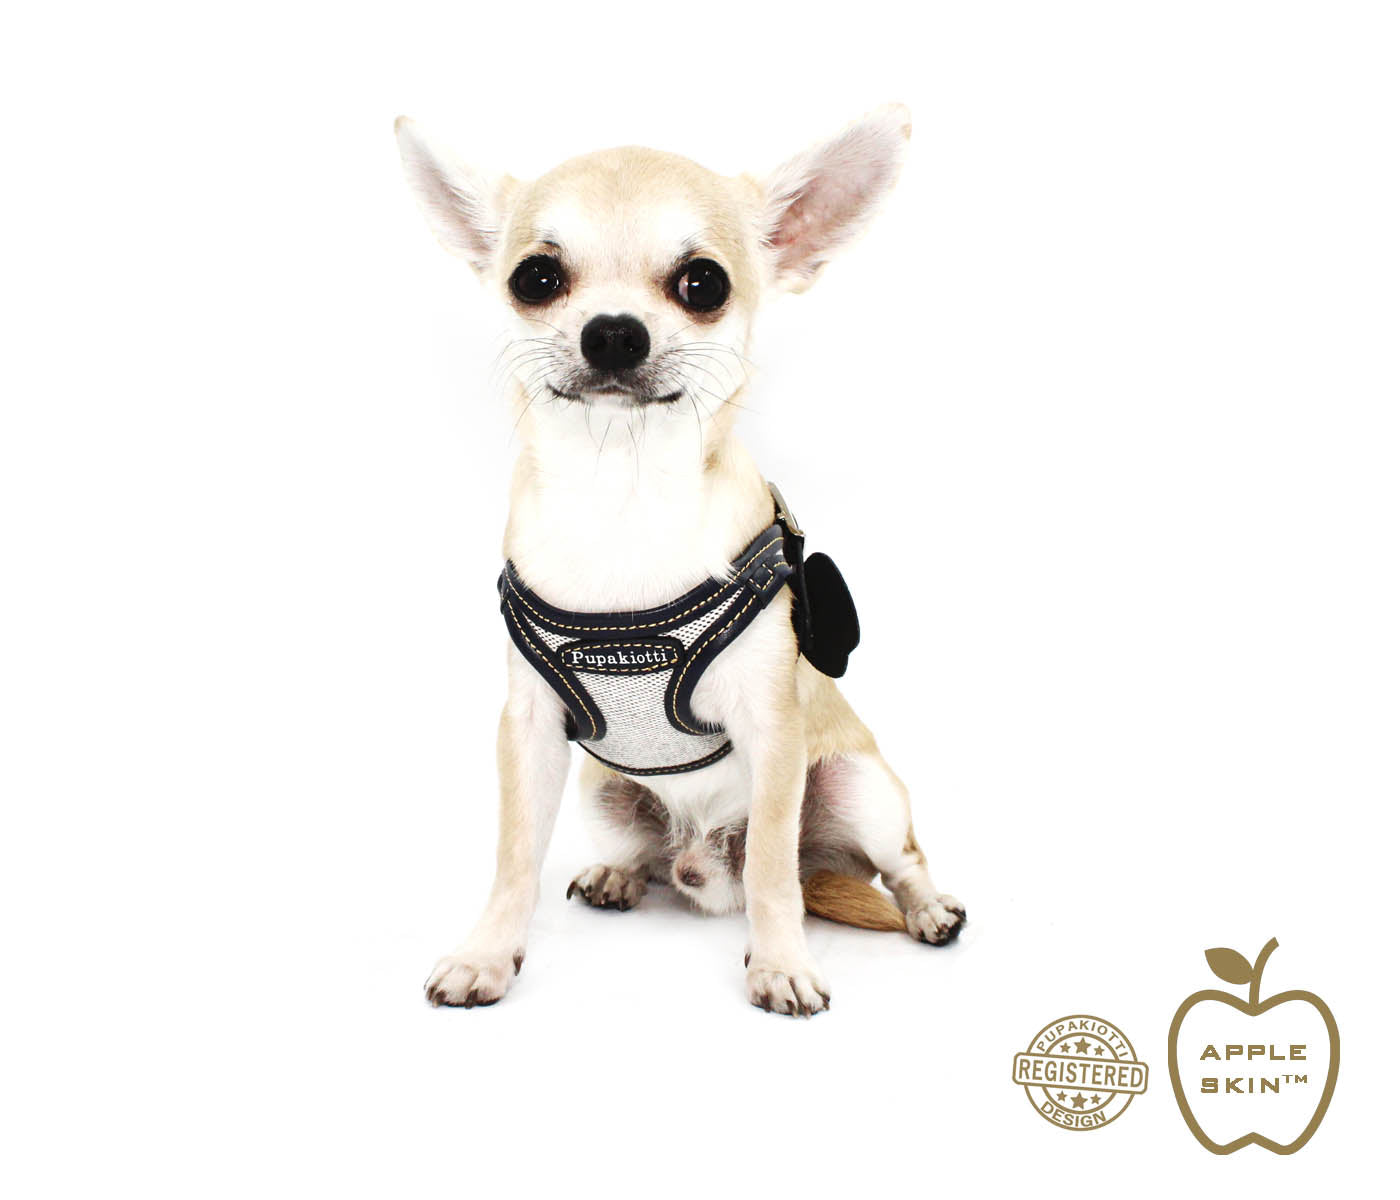 VEGAN. Ergonomic and adjustable harness in organic fabric and apple skin for dog